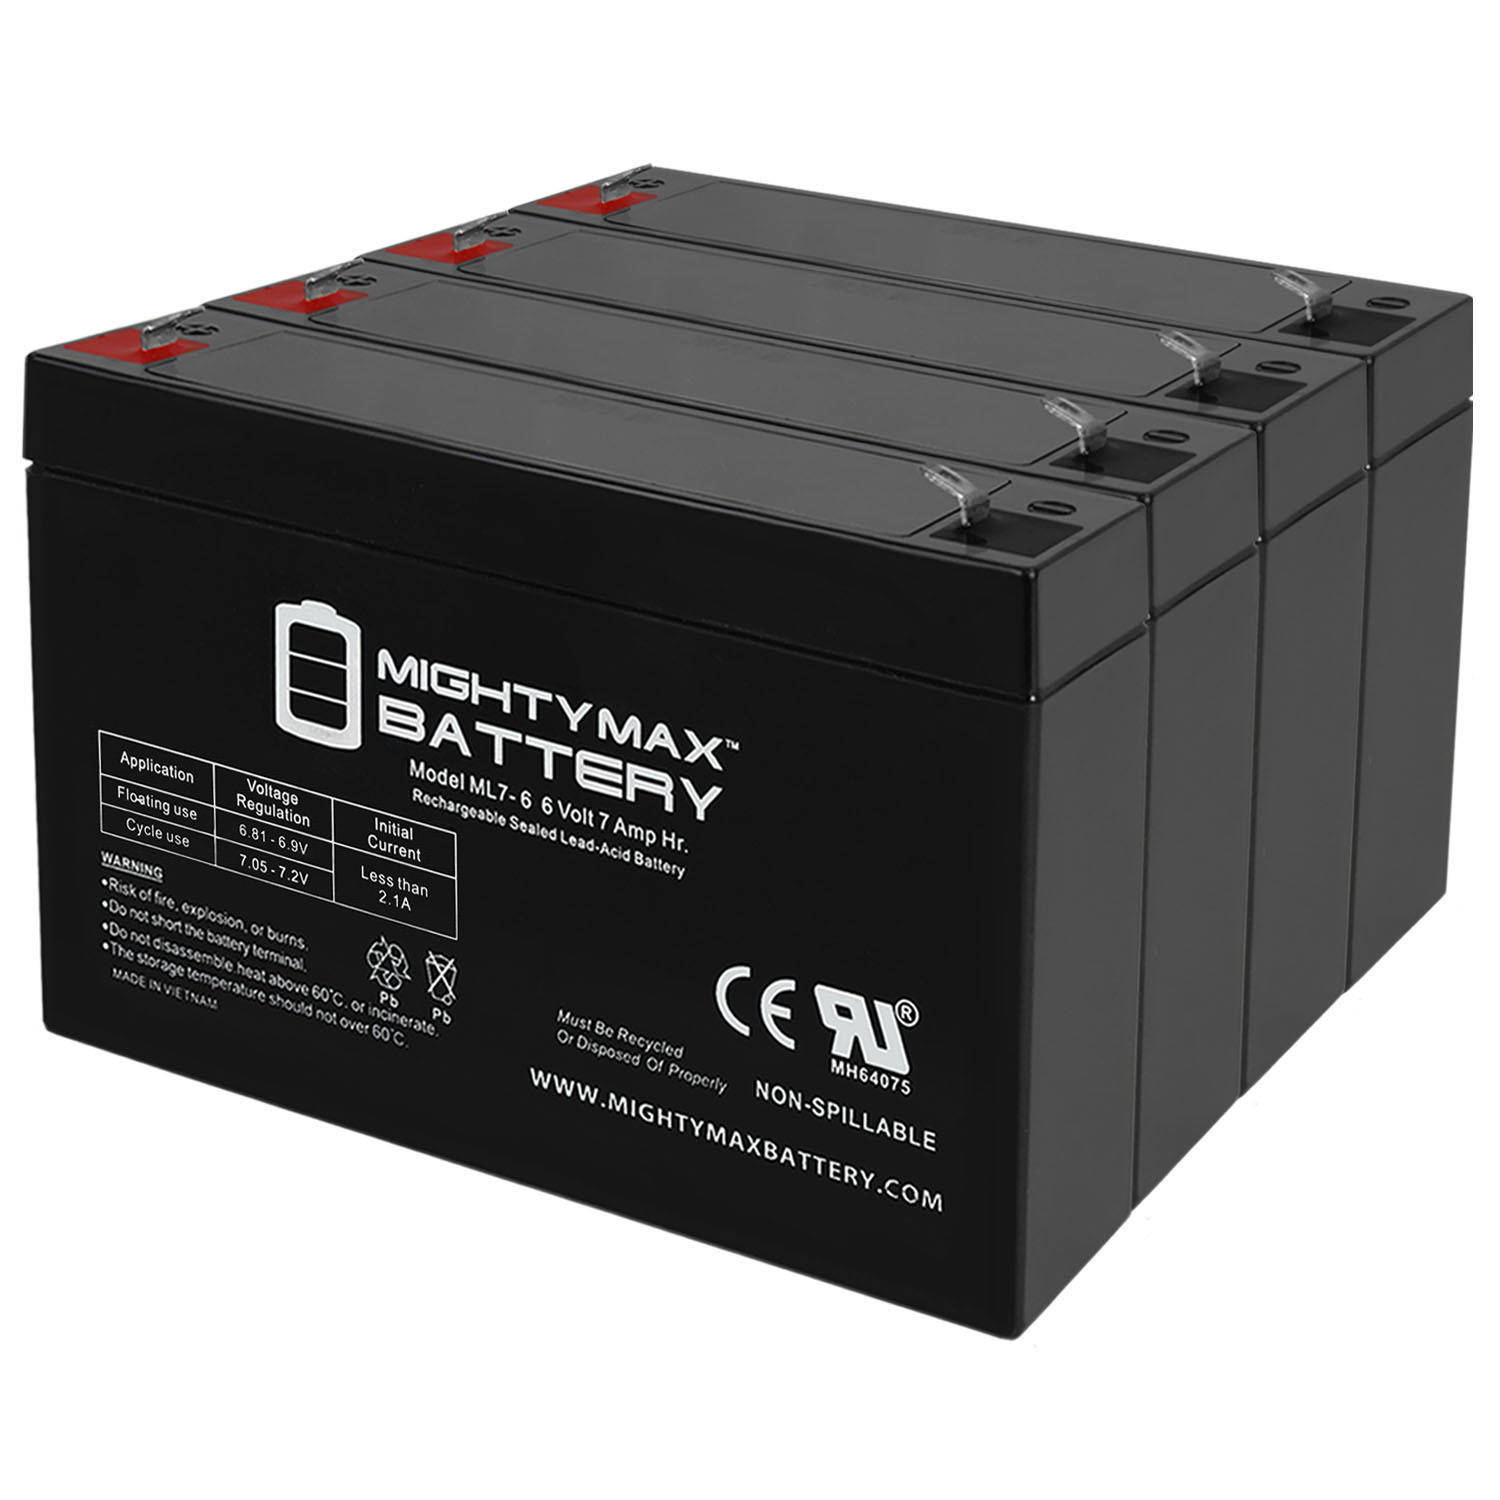 6V 7Ah SLA Battery Replacement for Kids Ride on Toy SB670 - 4 Pack